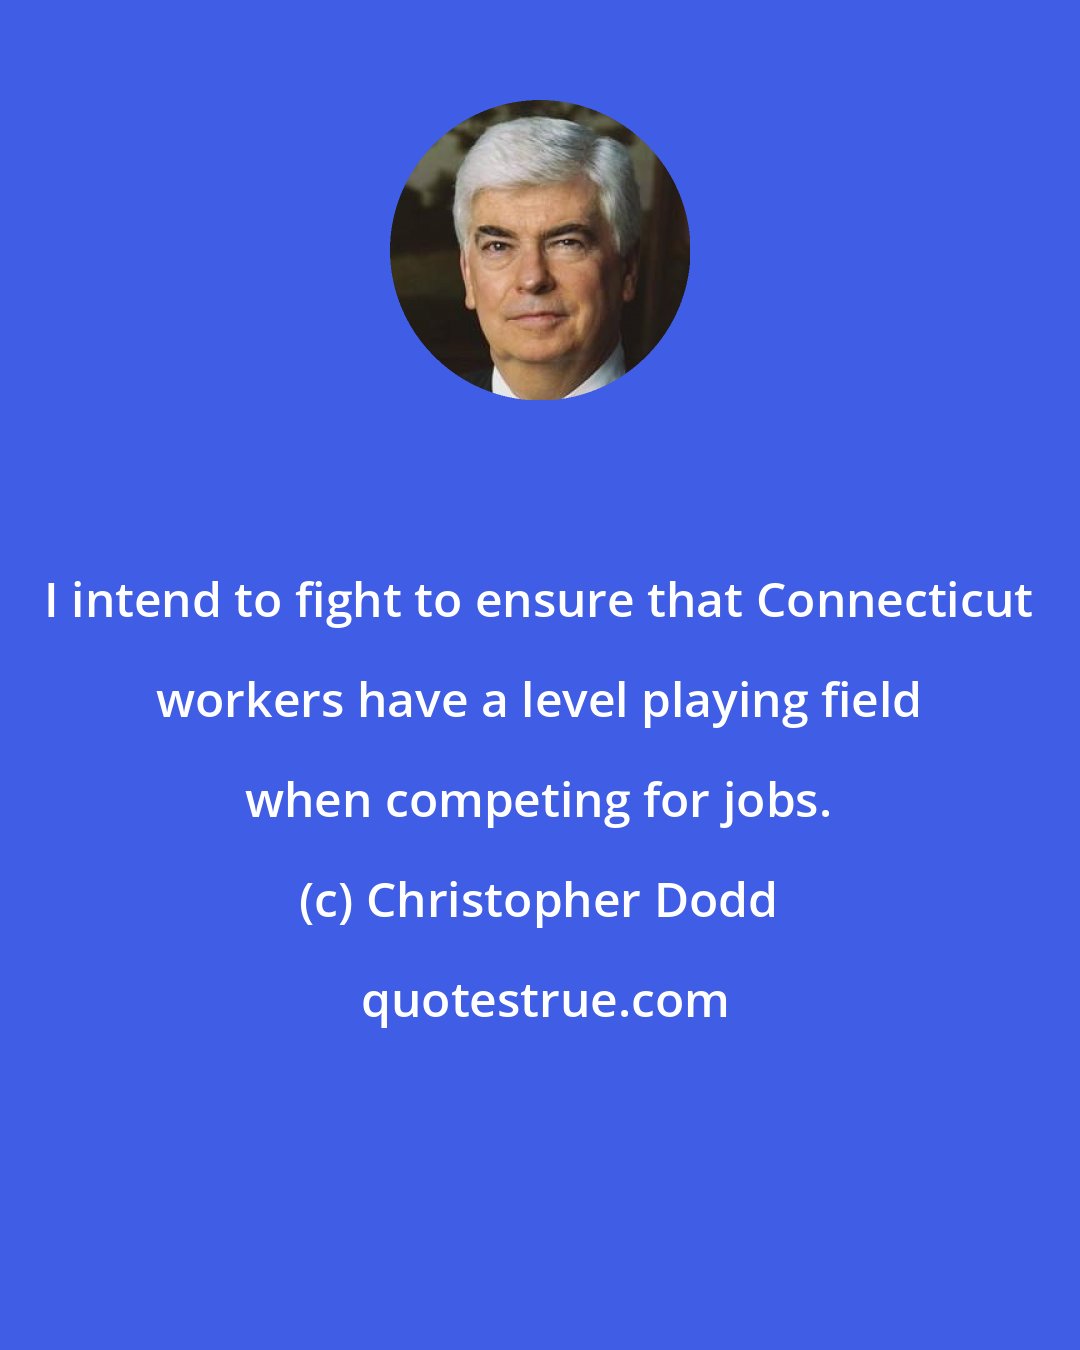 Christopher Dodd: I intend to fight to ensure that Connecticut workers have a level playing field when competing for jobs.